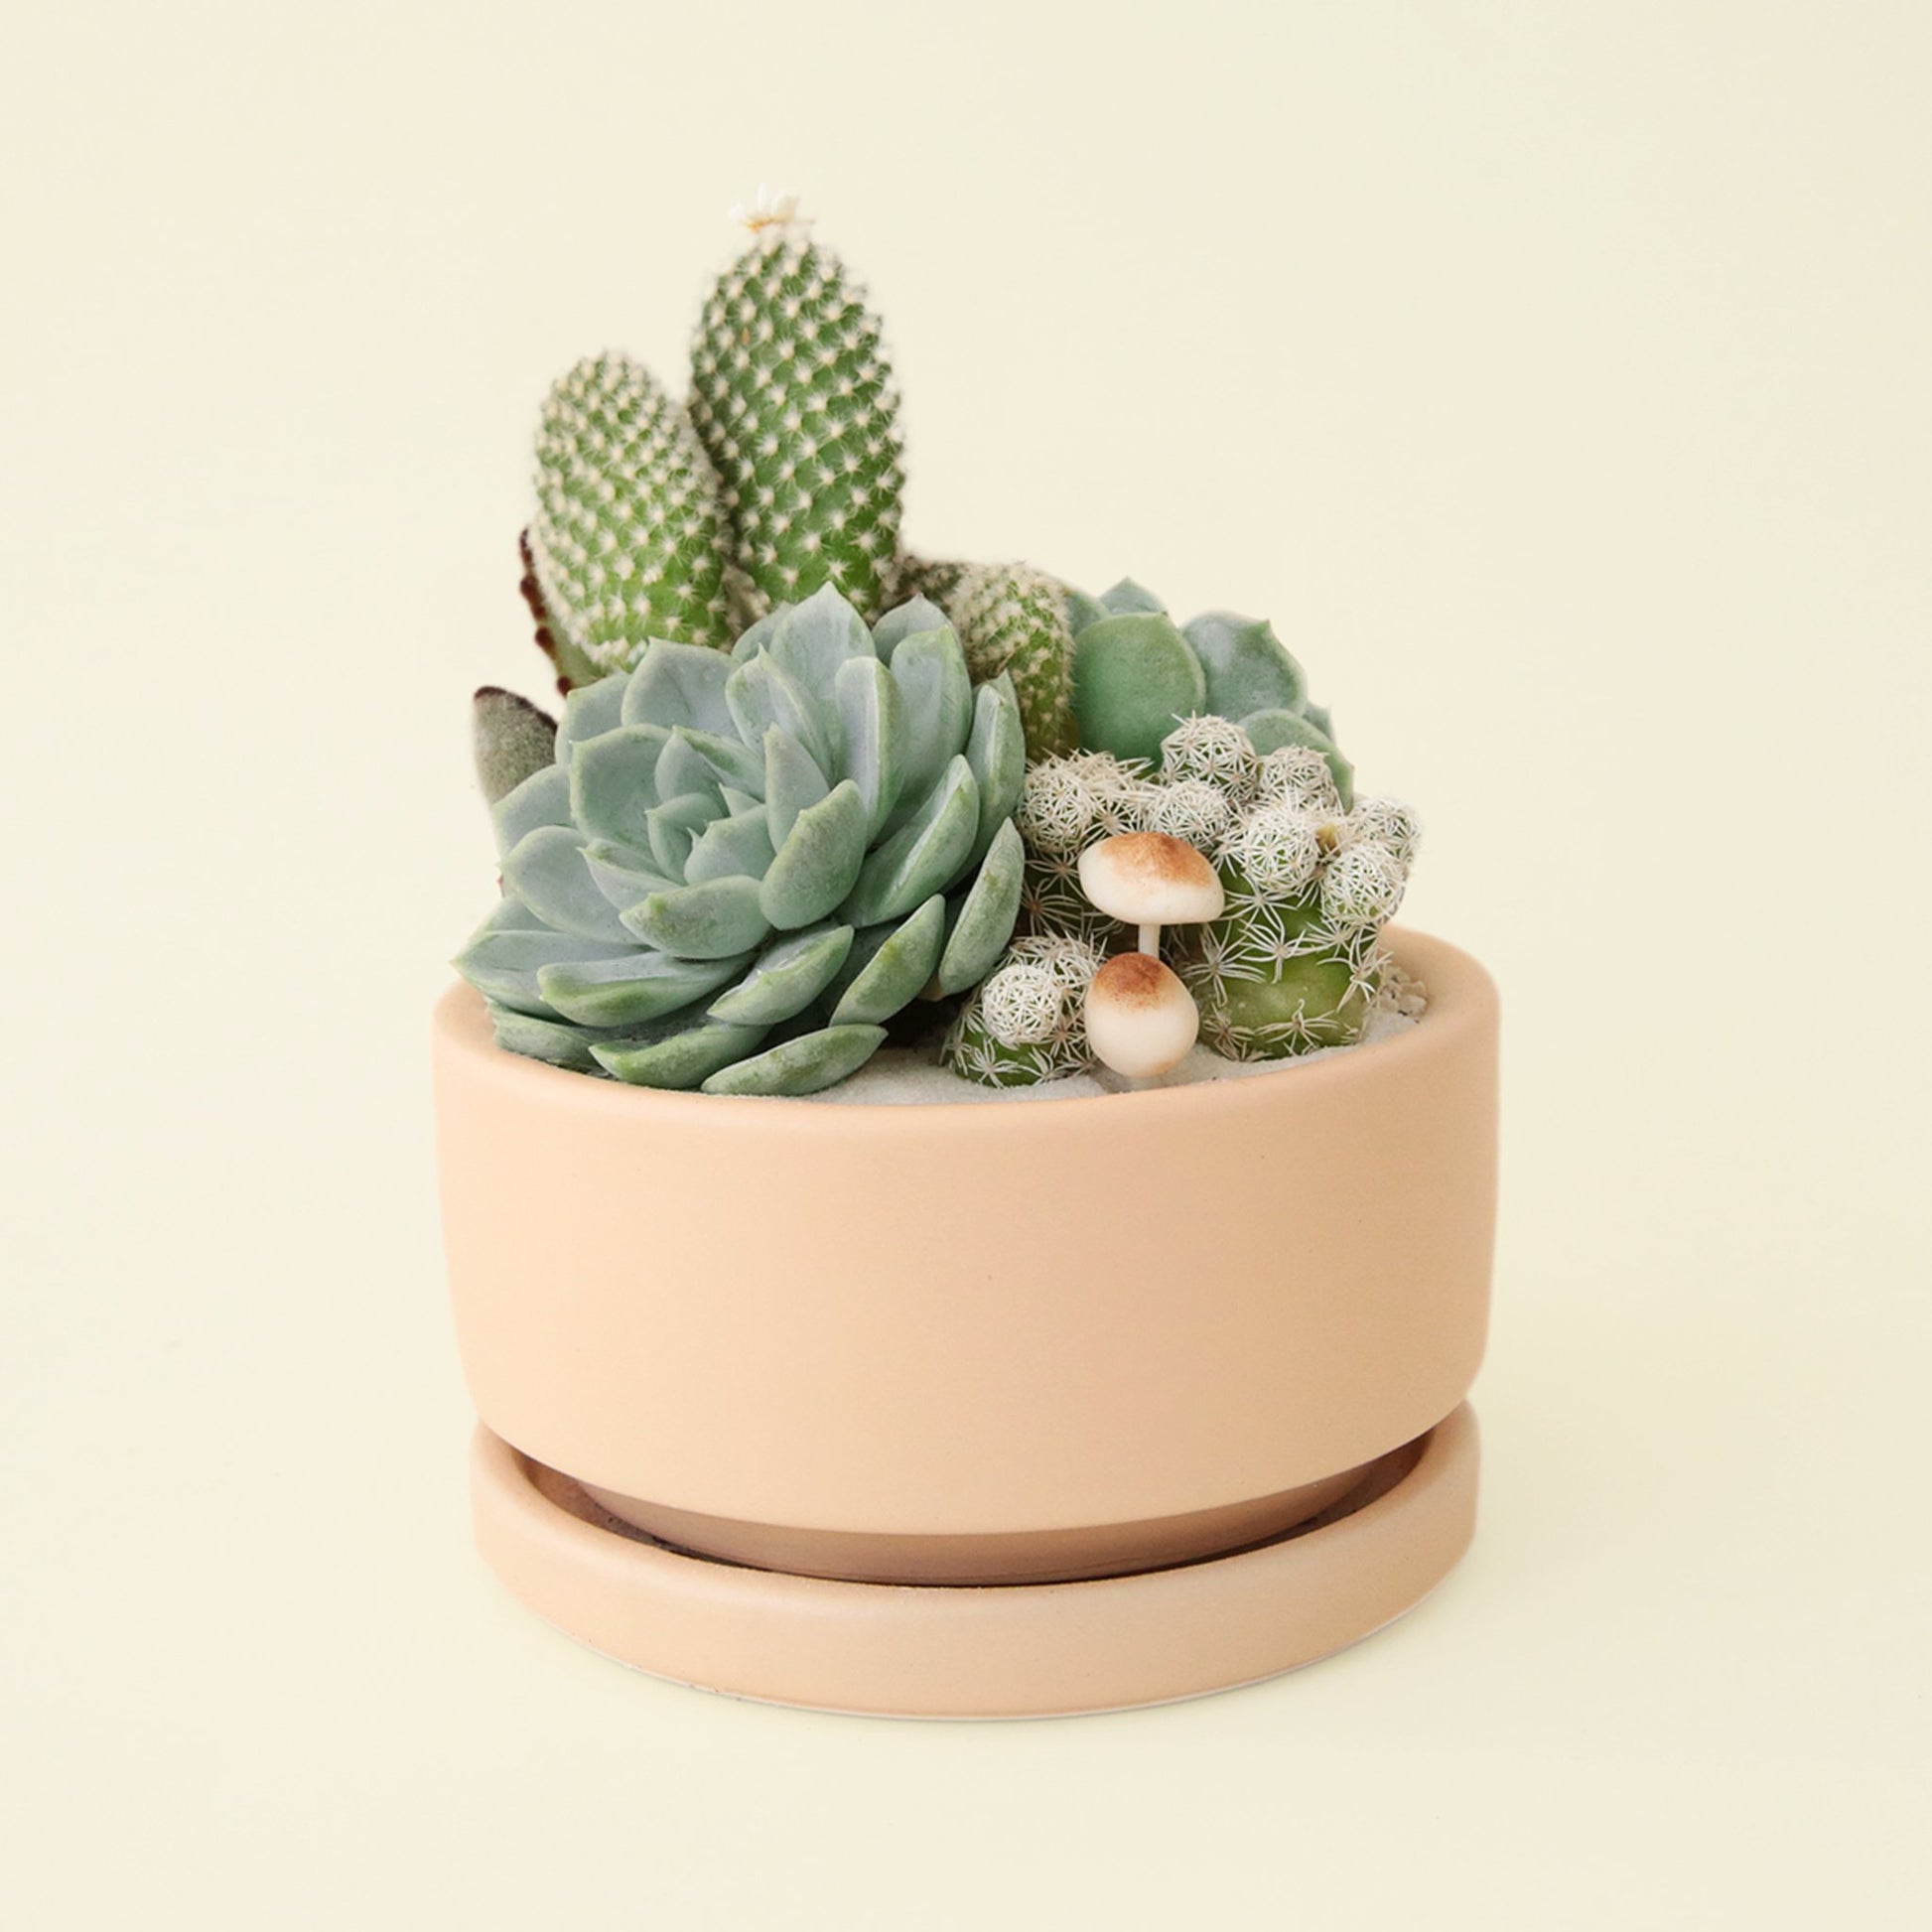 Small succulent planting arrangement planted in soft orange low bowl. The bowl is filled with a variety of cacti, succulents and baby mushrooms.